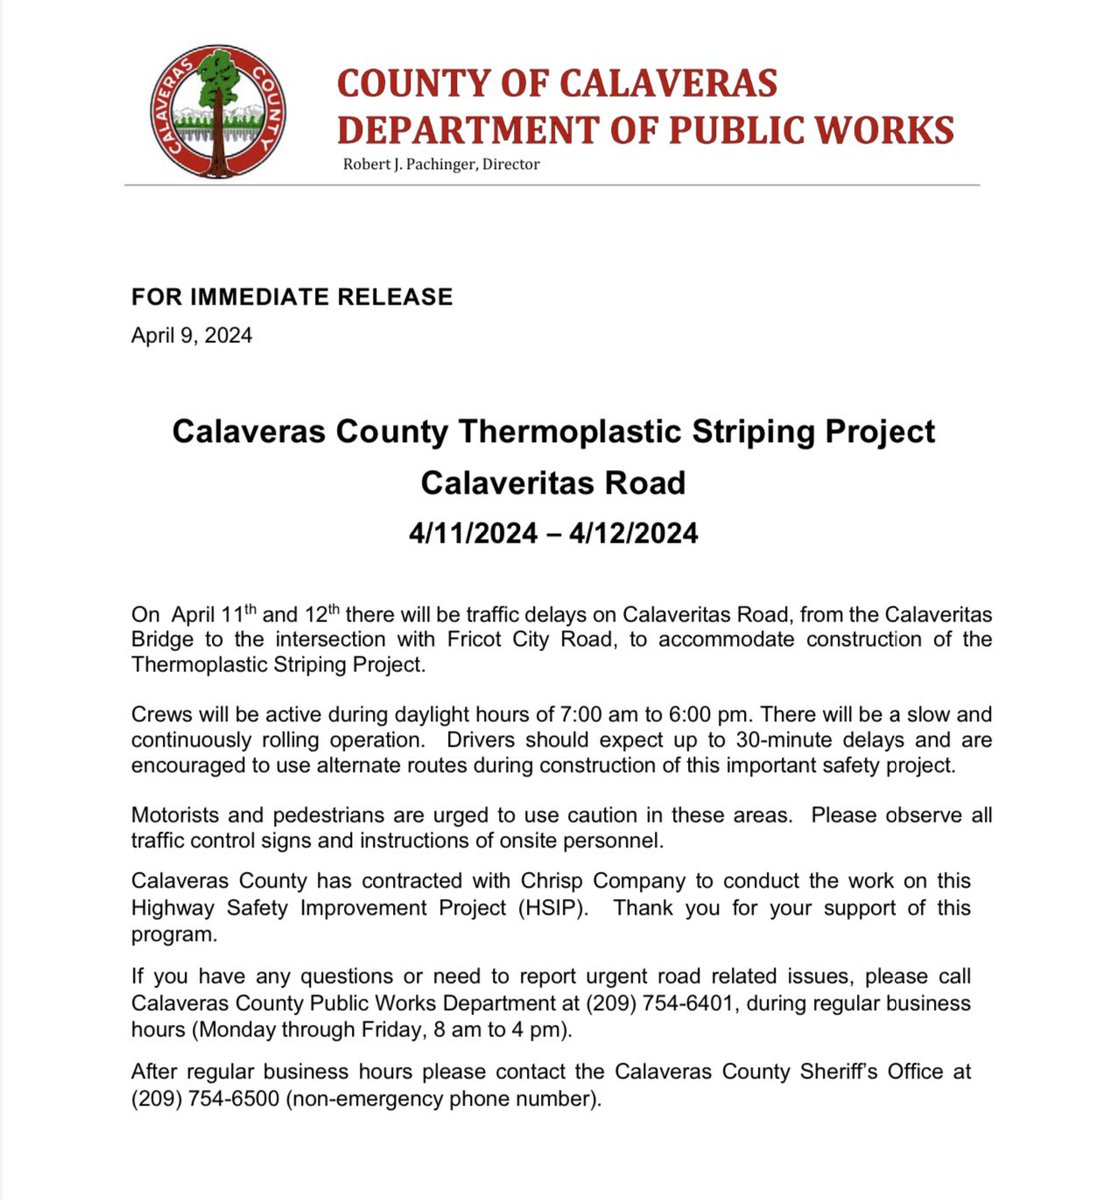 Please note upcoming traffic delays on Calaveritas Road to accommodate construction of the Thermoplastic Striping Project.